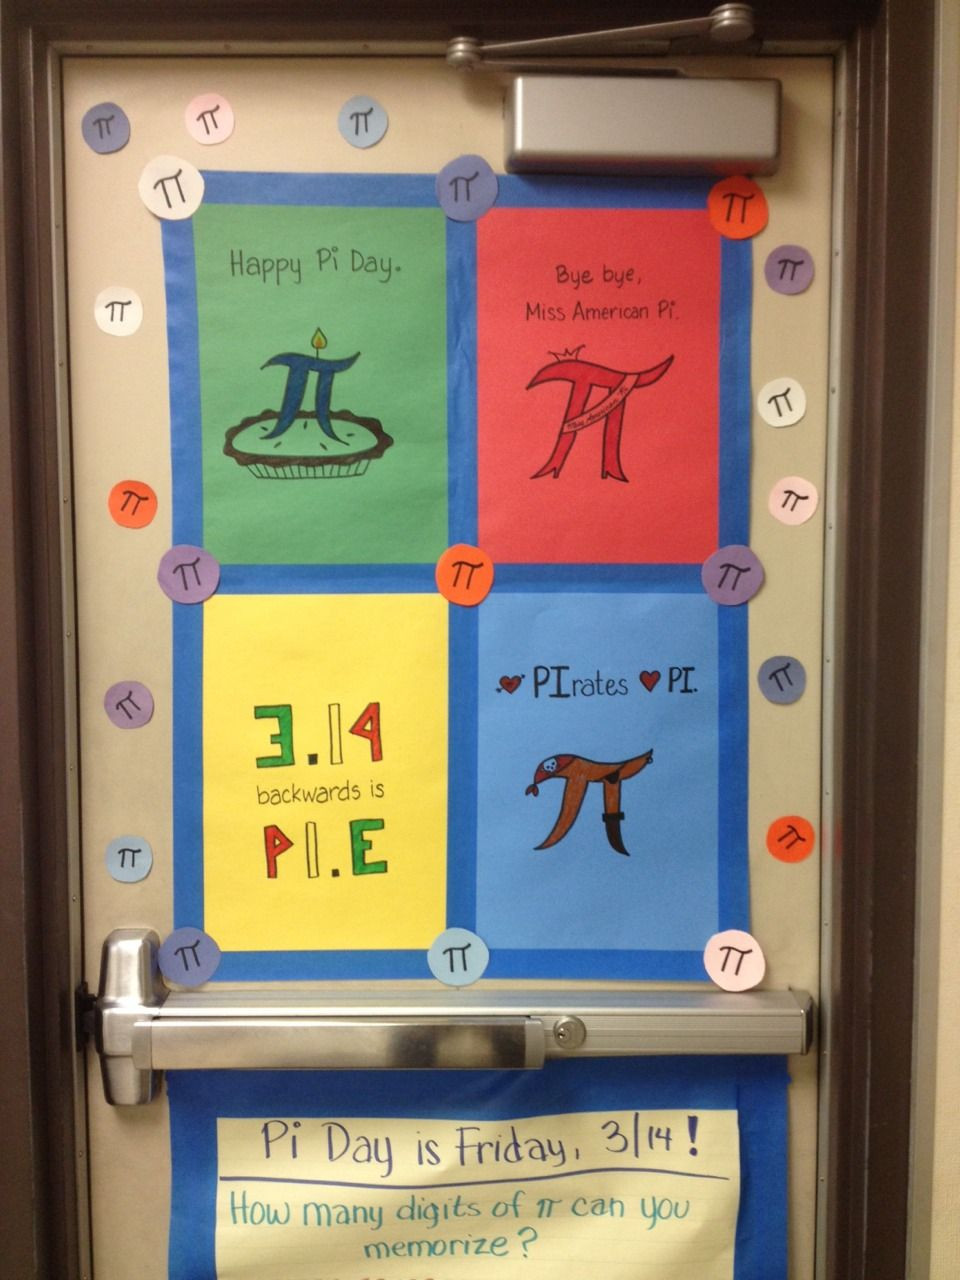 Pi Day Decorating Ideas
 I decorated my door for Pi Day